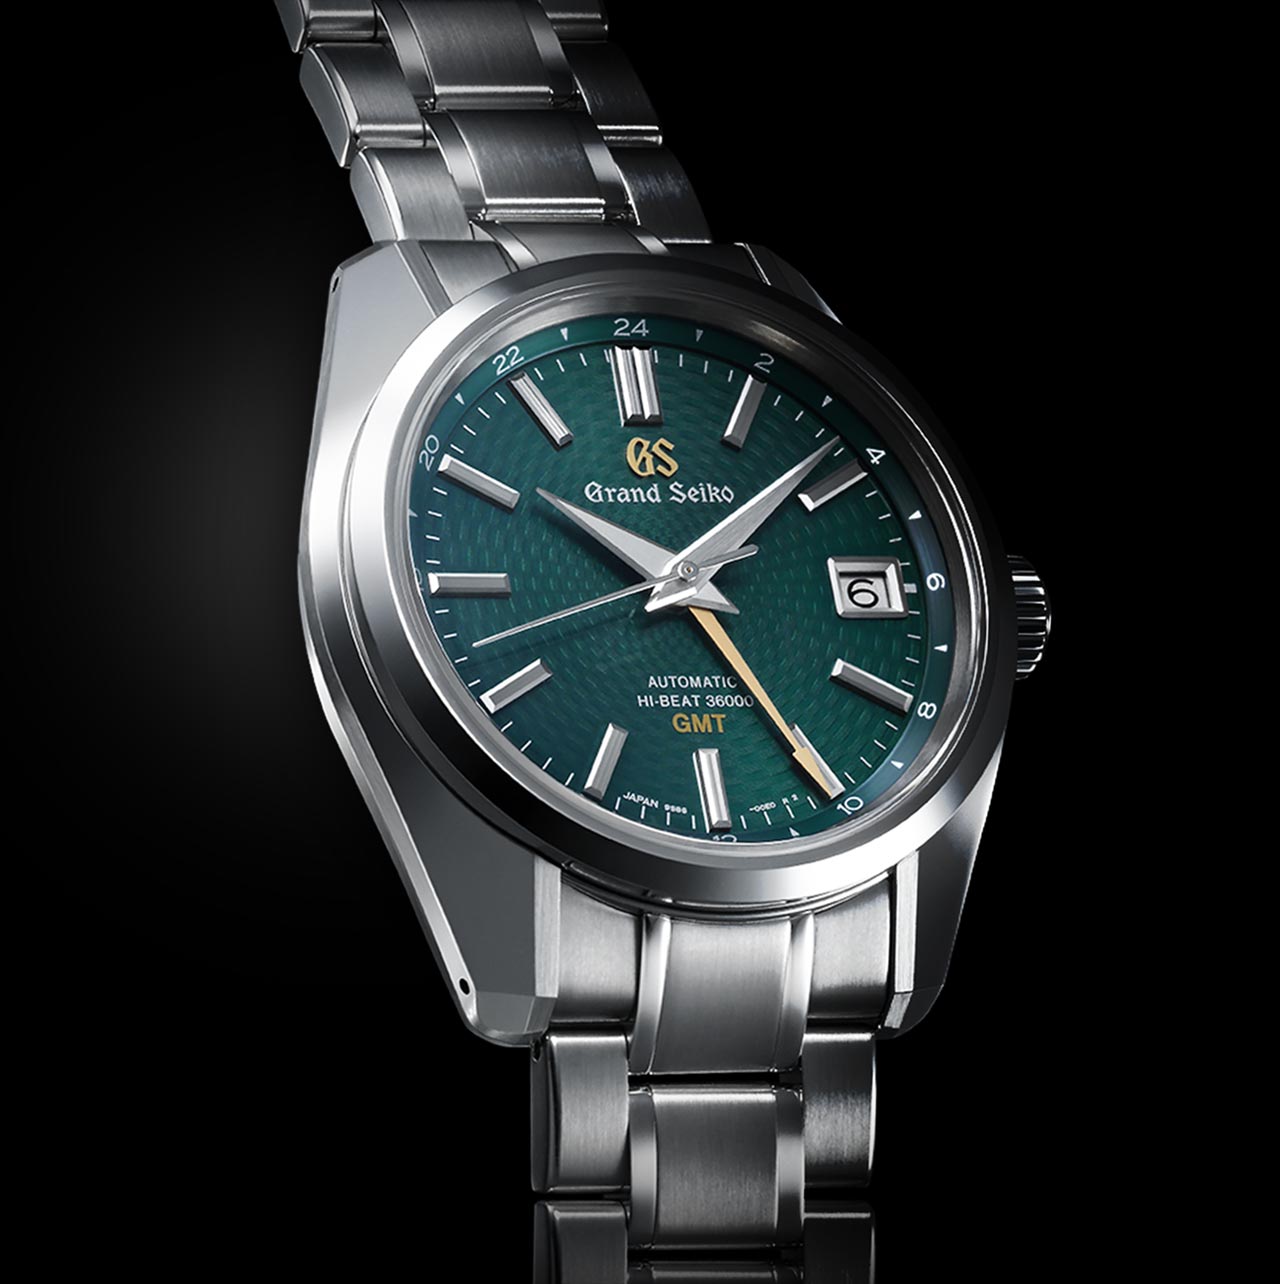 Grand Seiko - Hi-Beat 36000 Limited Edition | Time and Watches | The watch  blog